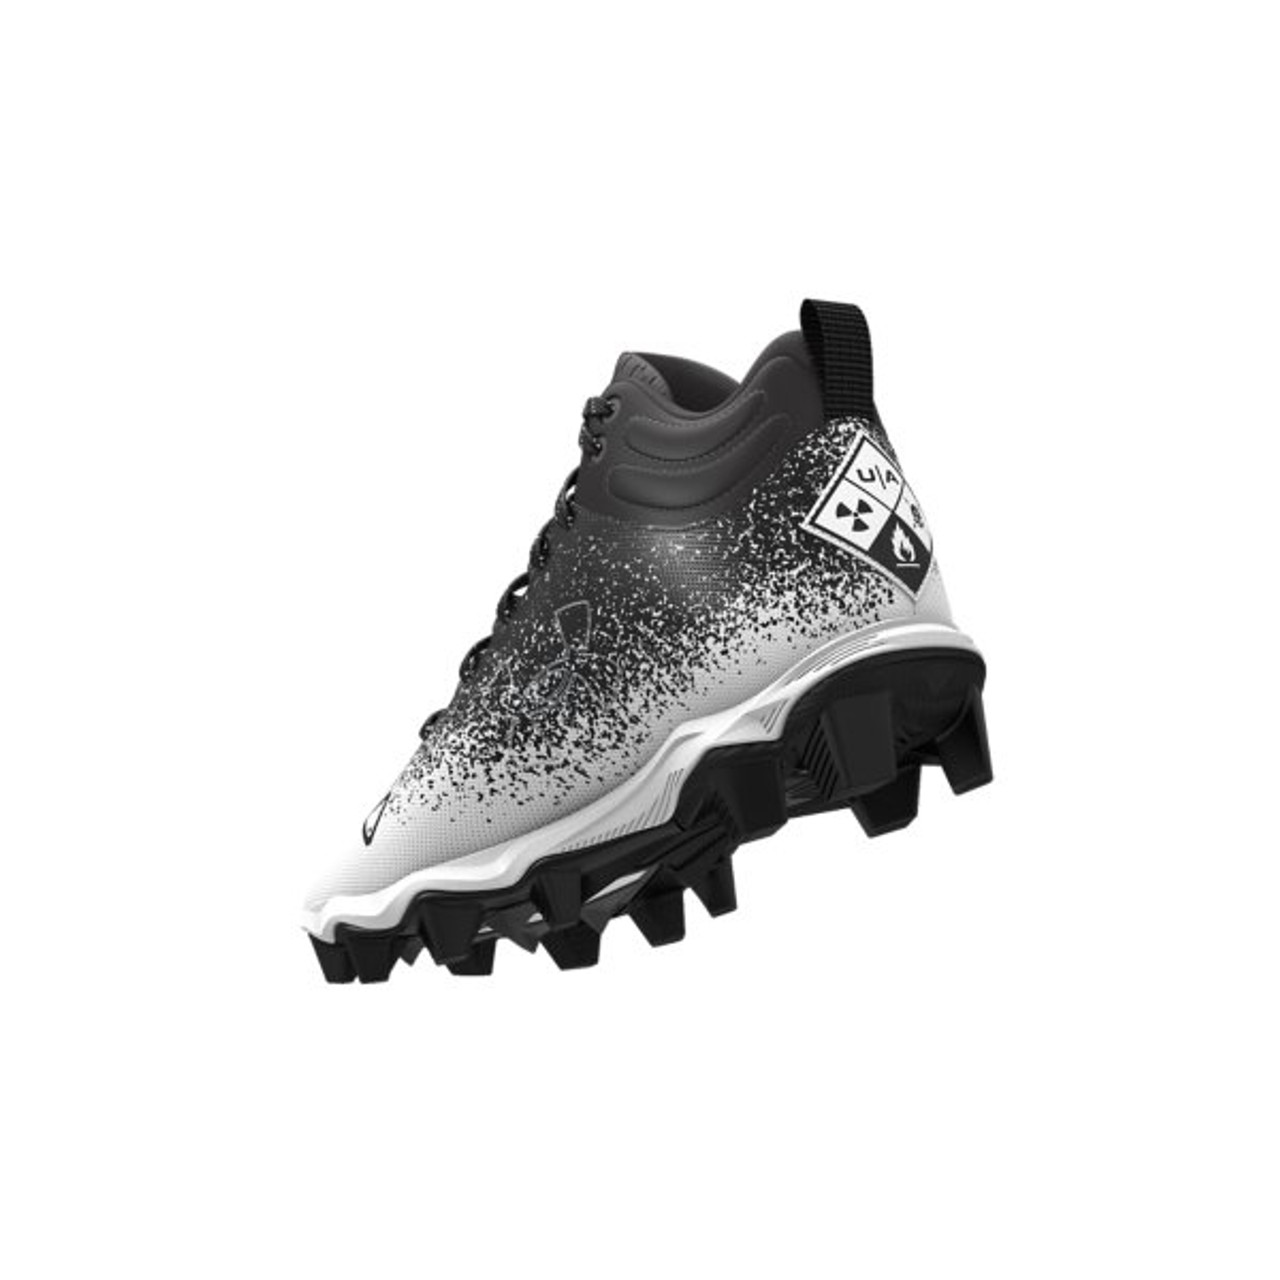 Under Armour Spotlight Franchise RM Jr. Youth's Wide Football Cleats